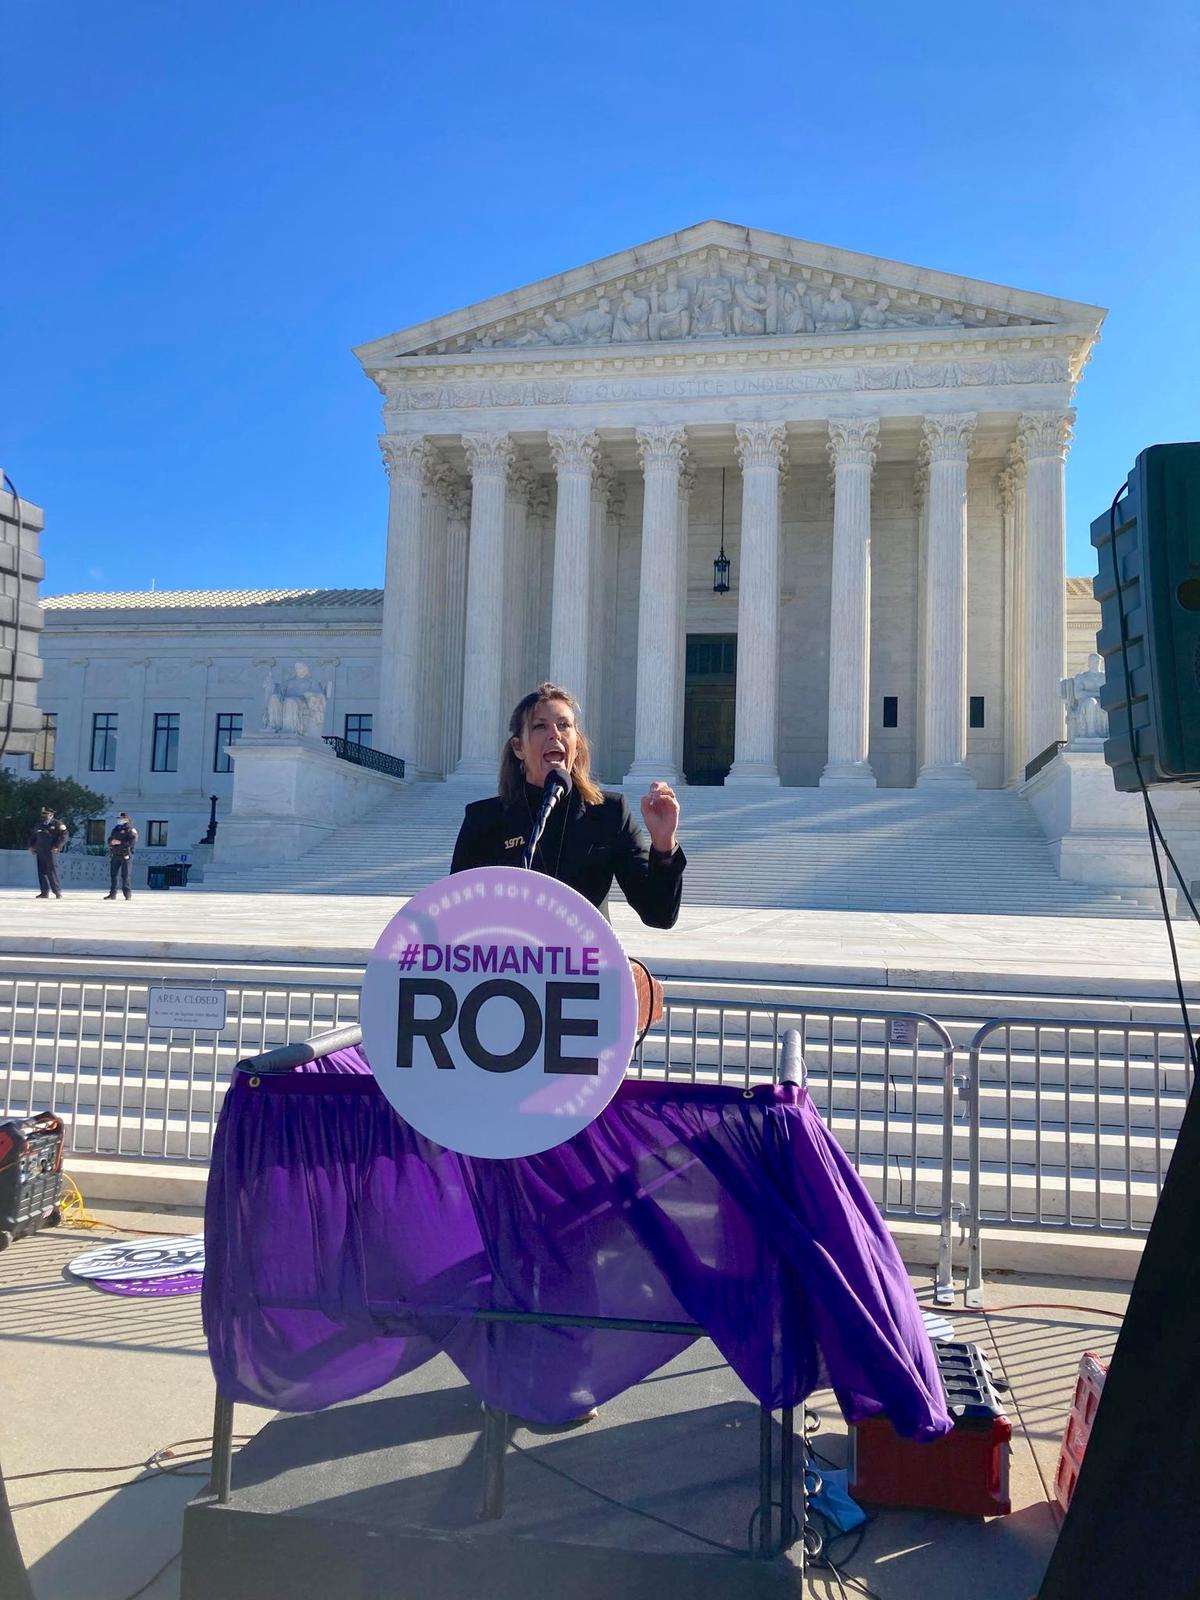 Kelly Lester speaks in a prayer rally in front of the U.S. Supreme Court in Washington, D.C. when it was announced that the Dobbs v. Jackson case would be heard in December 2021. (Courtesy of <a href="https://www.facebook.com/kellylesterforlife">Kelly Lester</a>)